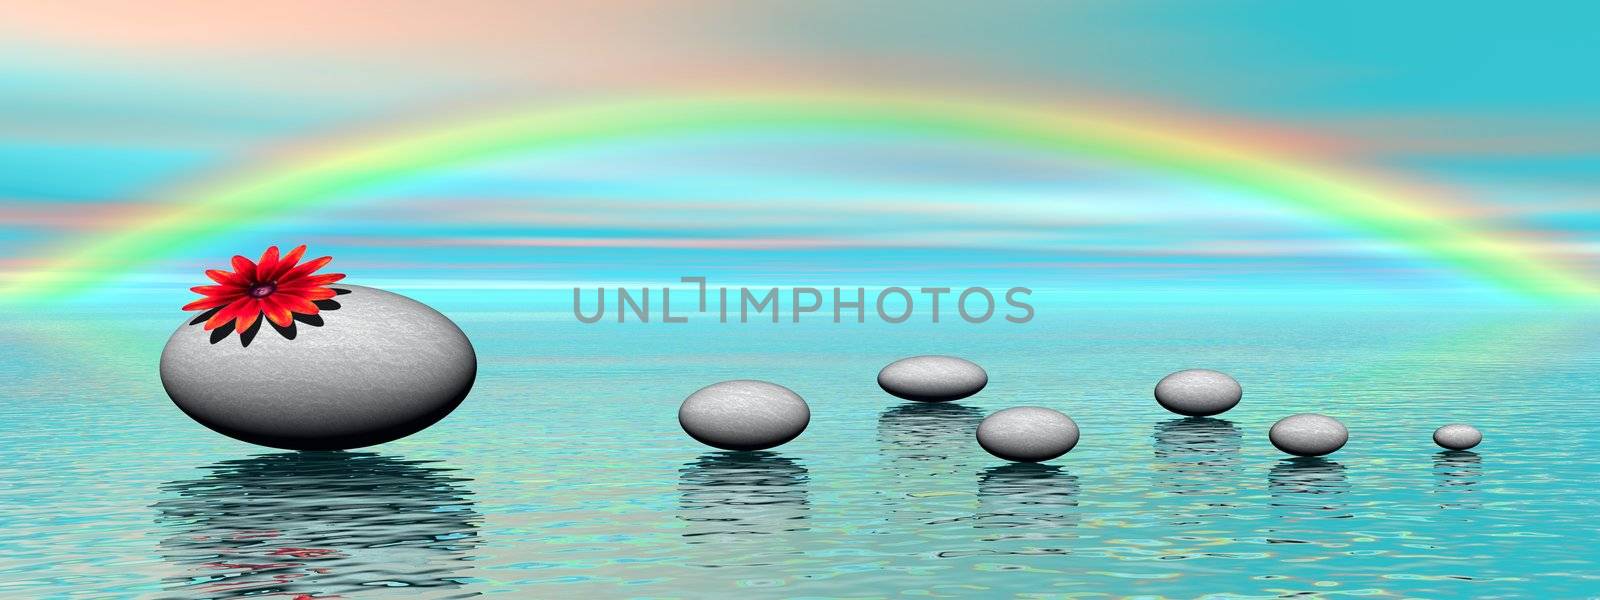 A big grey stones with a beautiful red flower on it and small pebbles upon ocean and with colored sky with rainbow